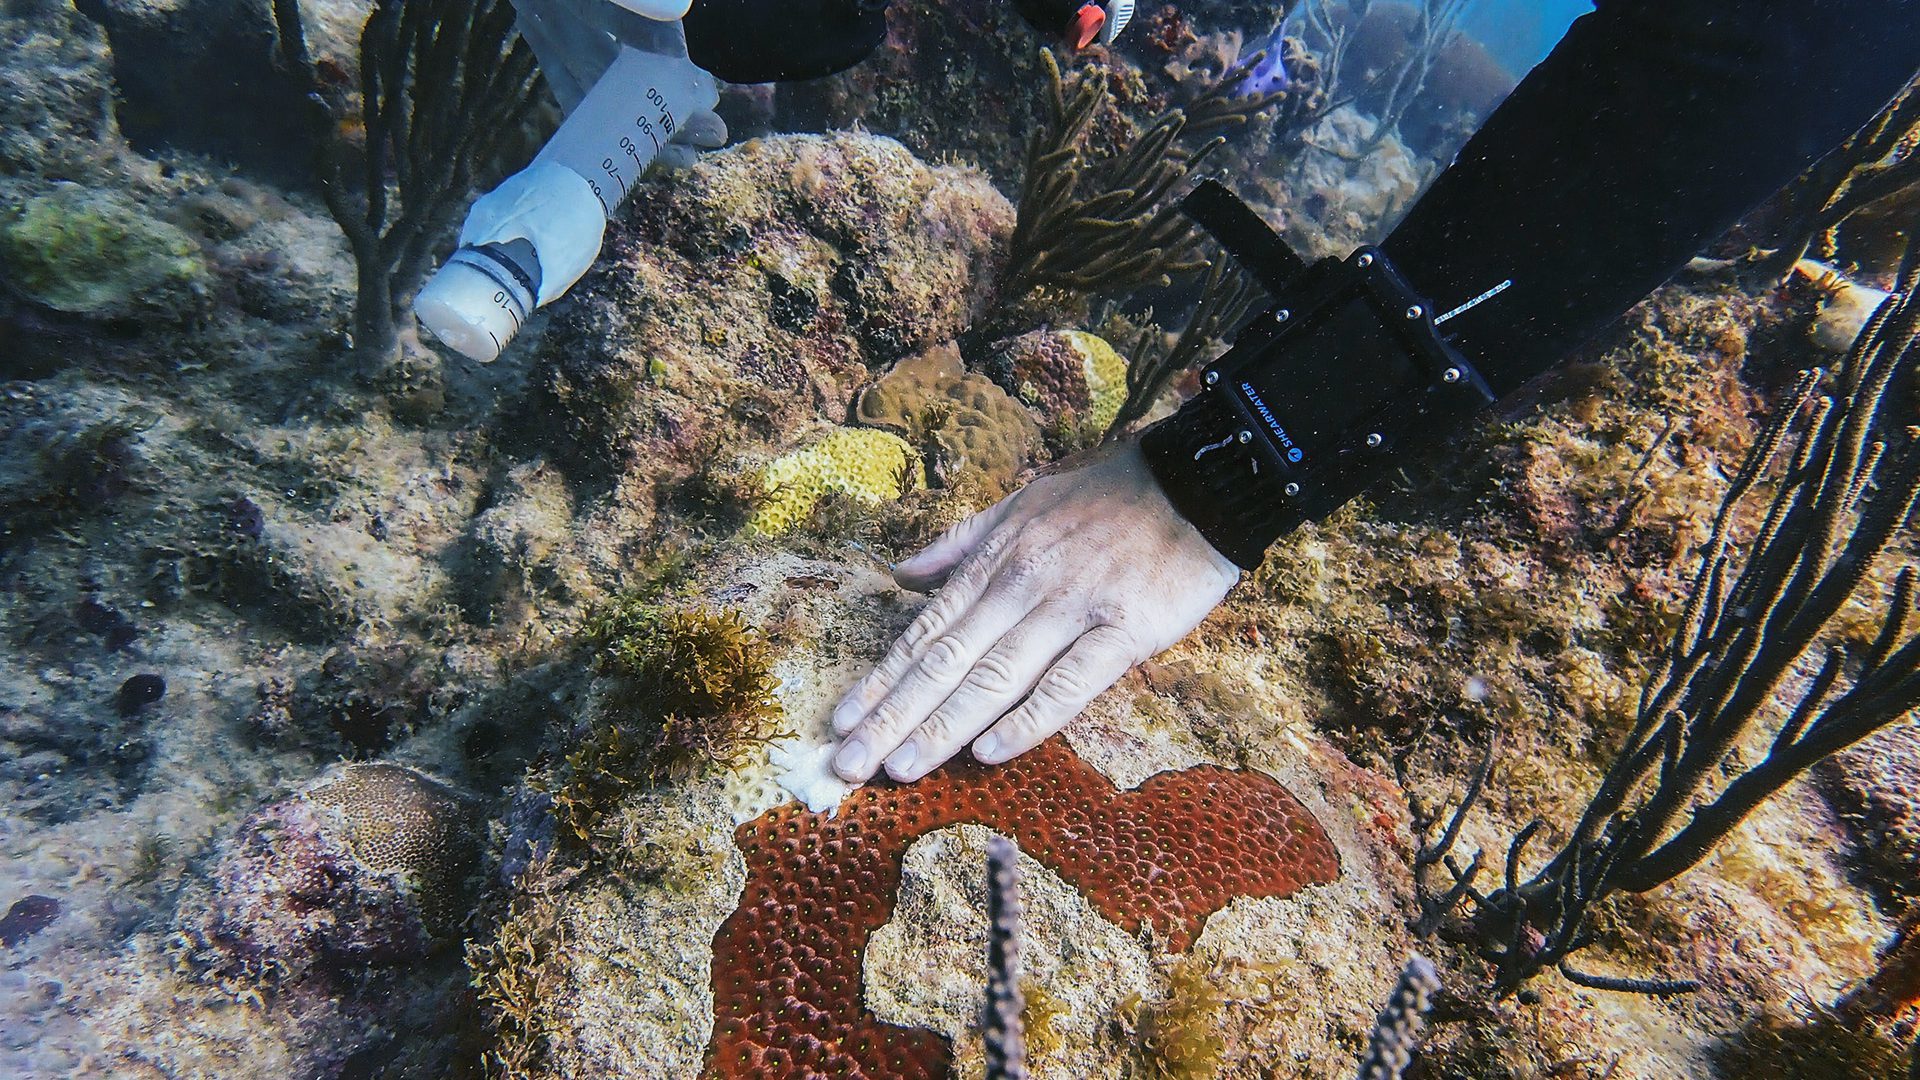 University of the Virgin Islands graduate student Brad Arrington applies an amoxicillin paste to stop further tissue loss on an infected coral. (Photo courtesy of Sonora Meiling, © University of the Virgin Islands)